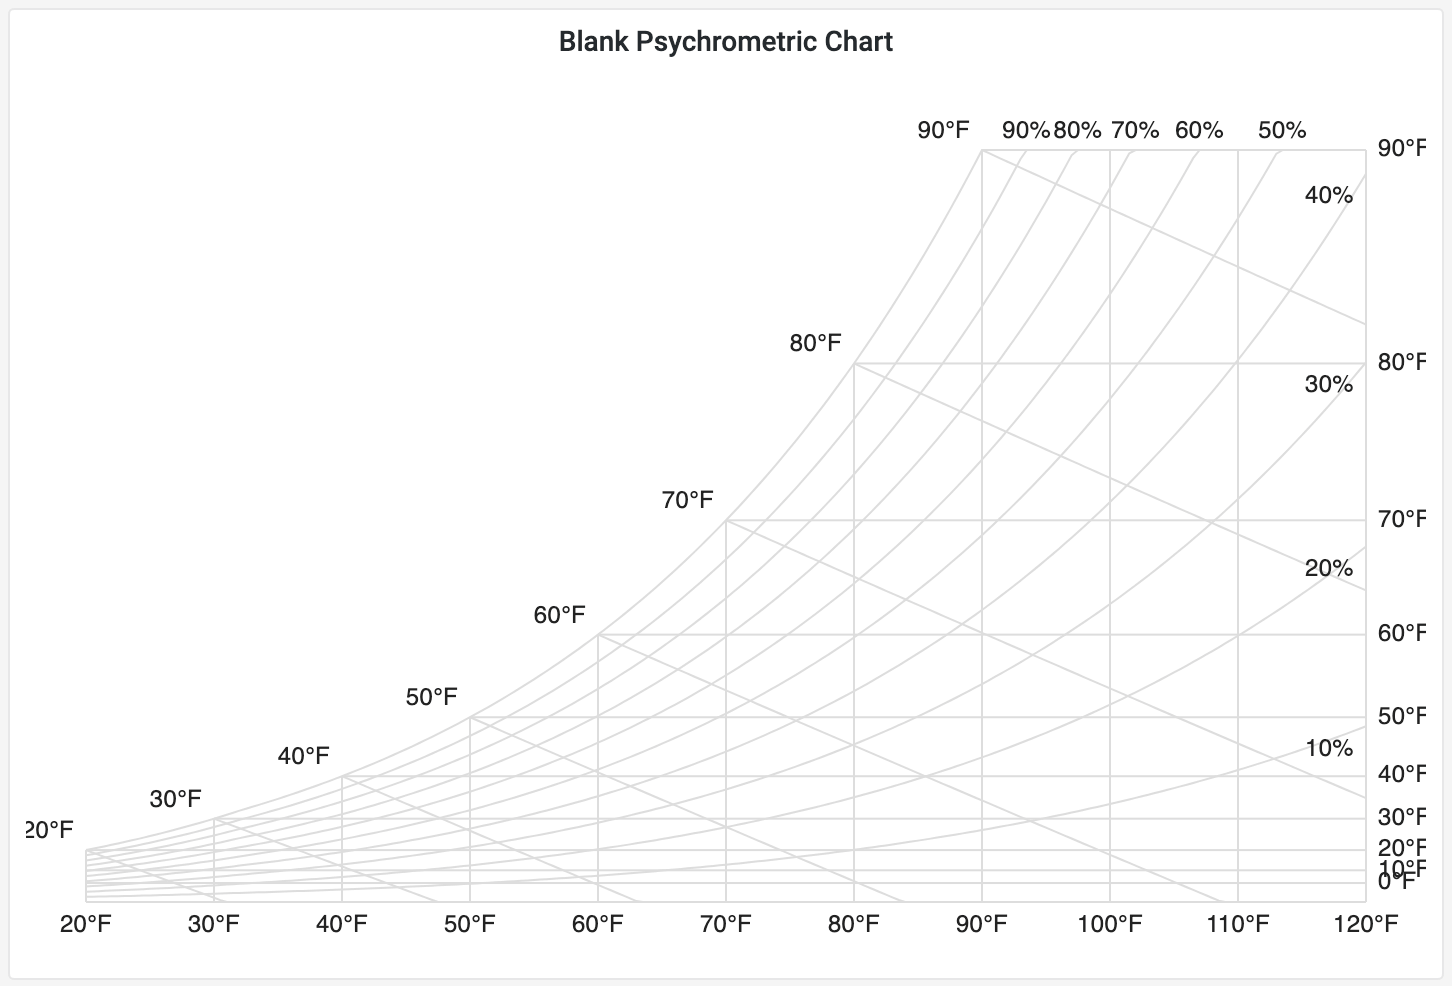 *A blank psychrometric chart, as generated by Psychart.*